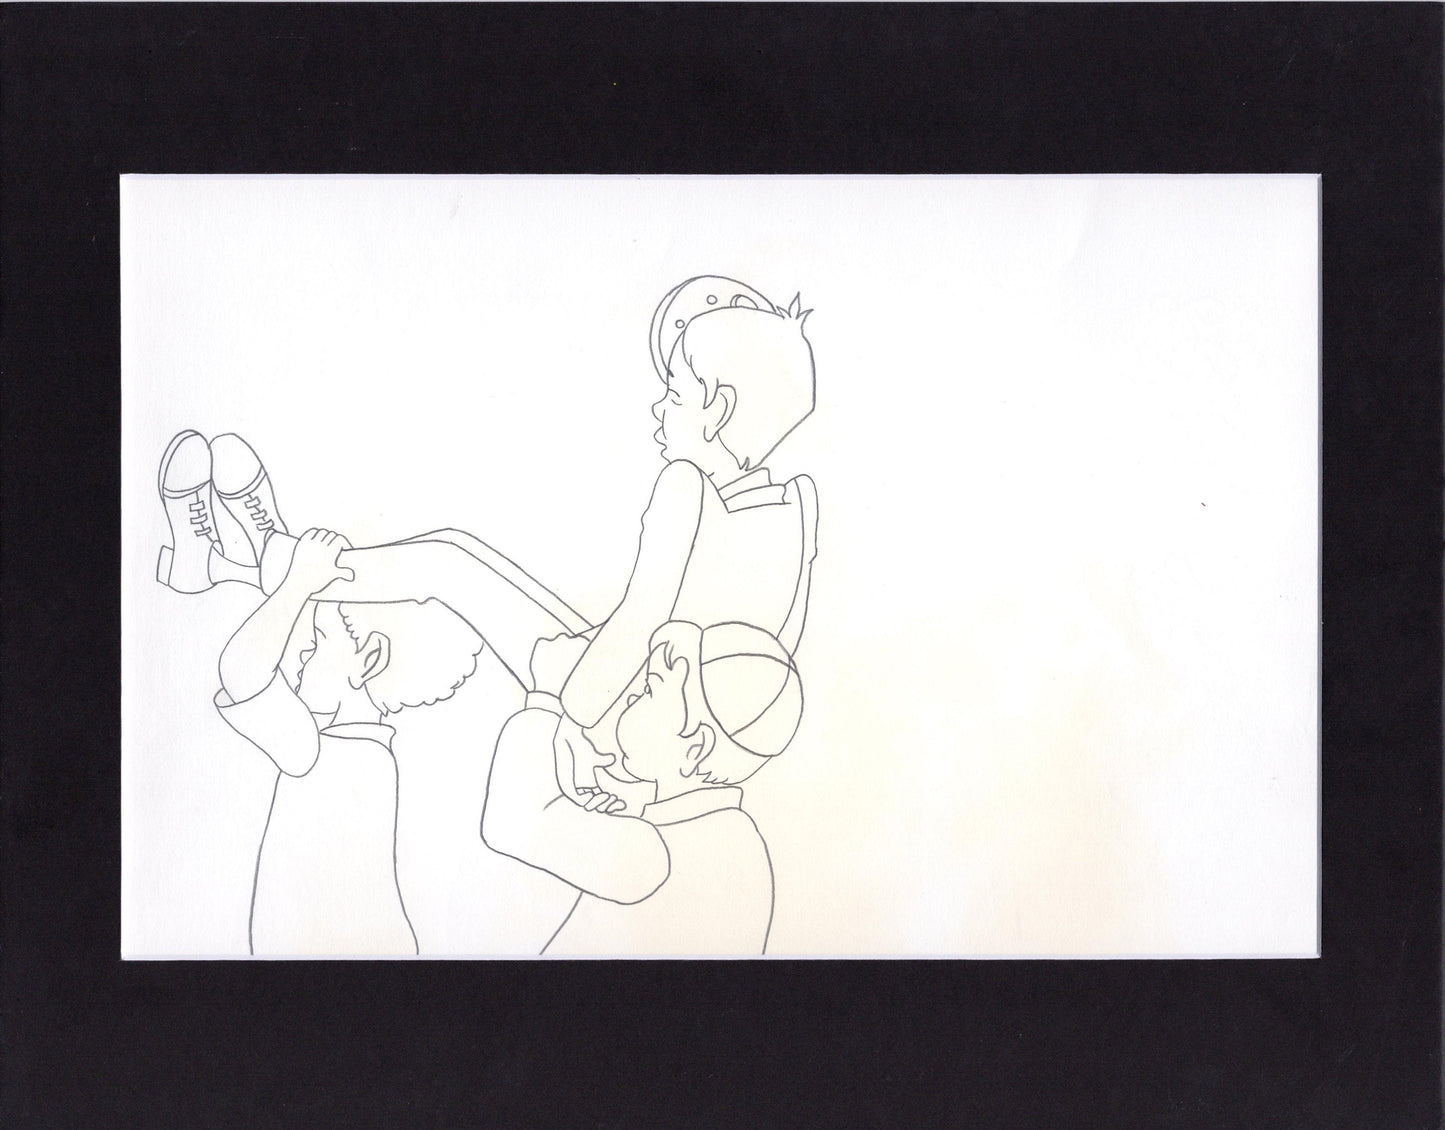 Little Rascals Production Animation Cel Drawing with Alfalfa from Hanna Barbera 1982-83 175